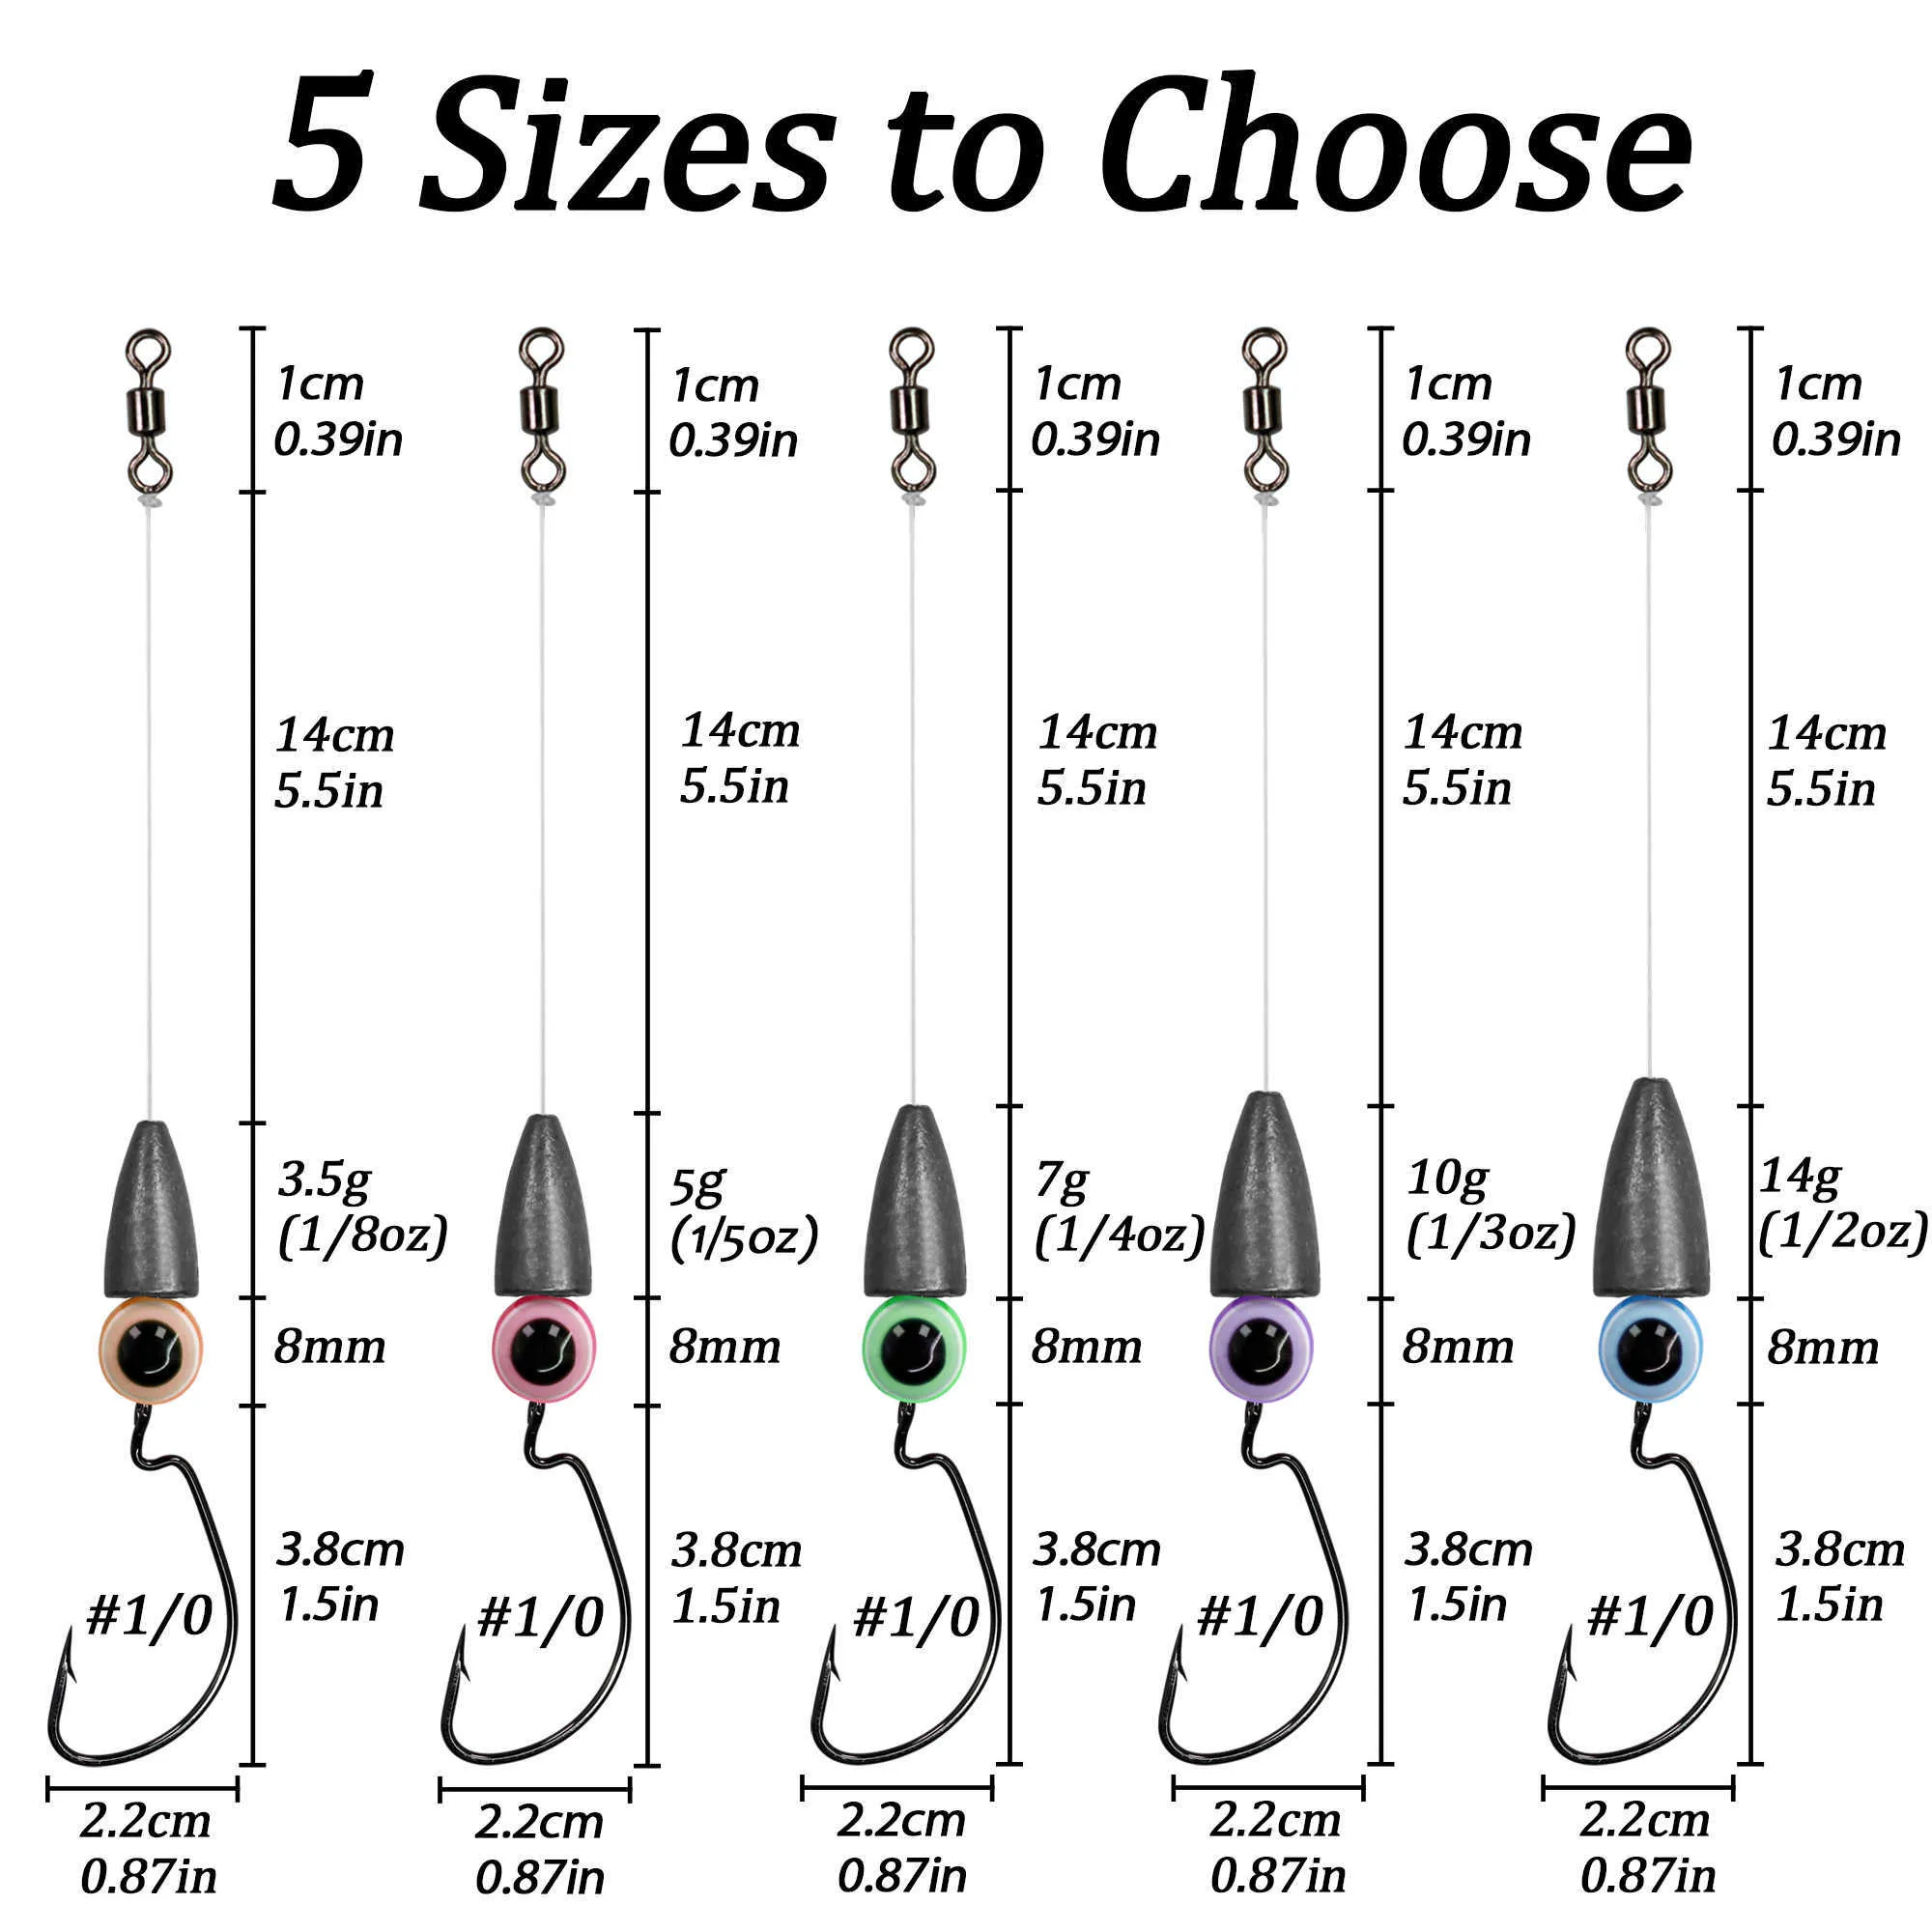 Texas Rig Set With Weedless Swimbait Hooks For Bass, Carp, And Bait Fishing  Ready Made With Carolina Tackle, Fishhooks, Hair Rigs, Boilies, Batteries  P230317 From Mengyang10, $16.4